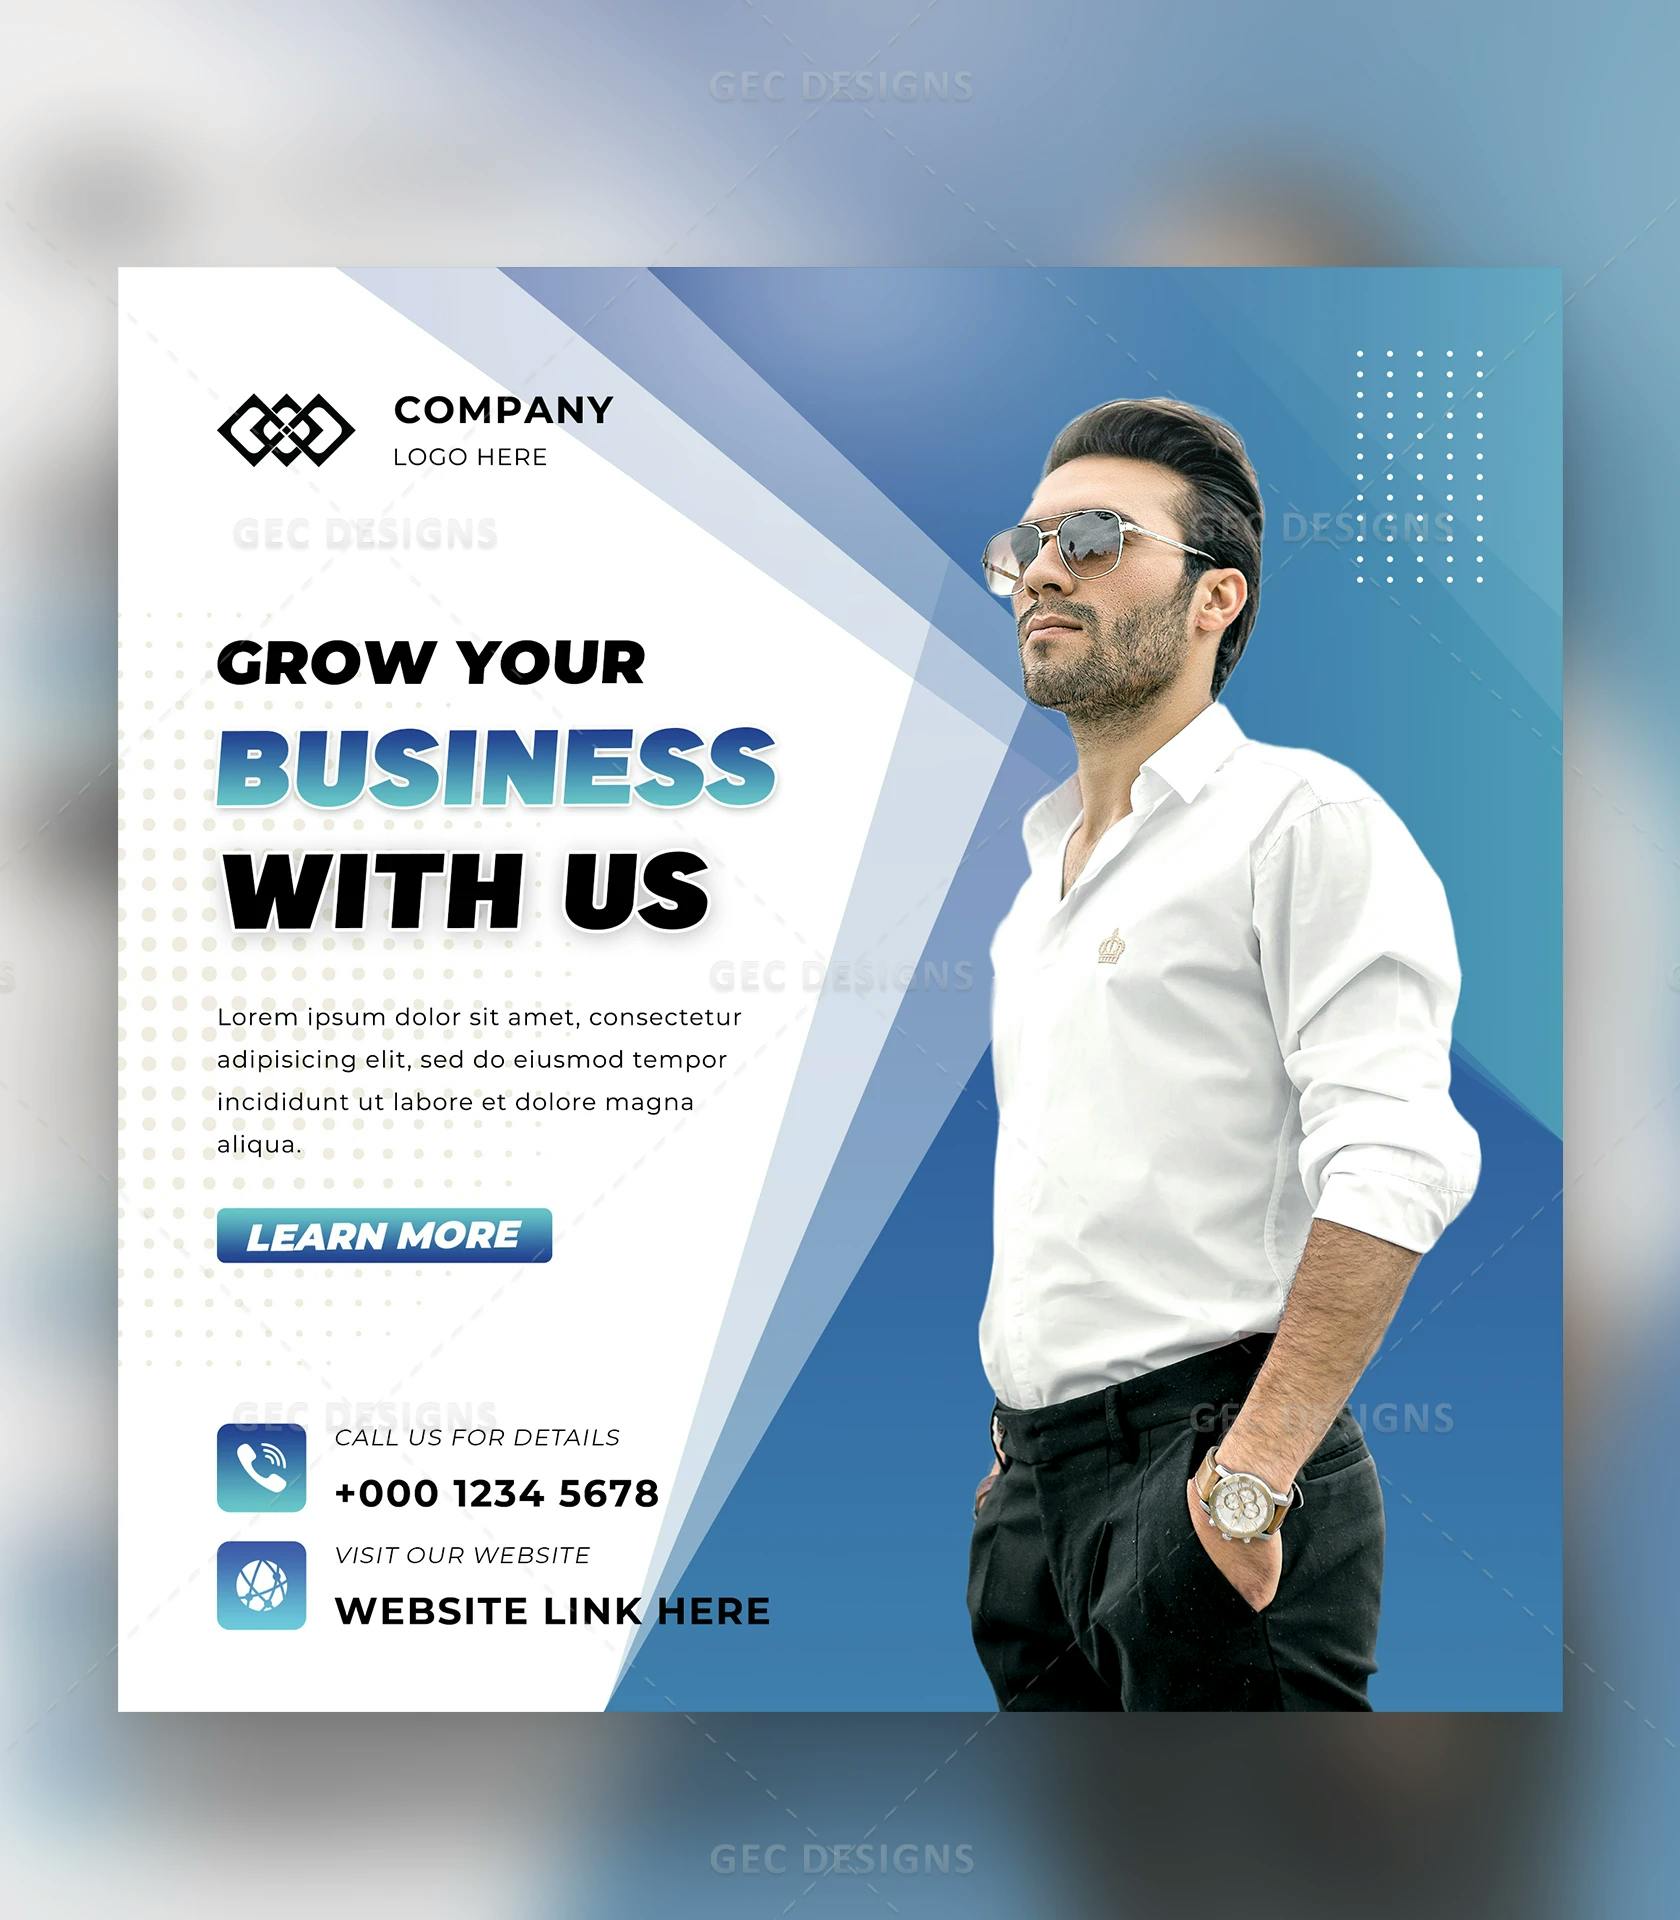 Business solutions social media and Instagram poster template